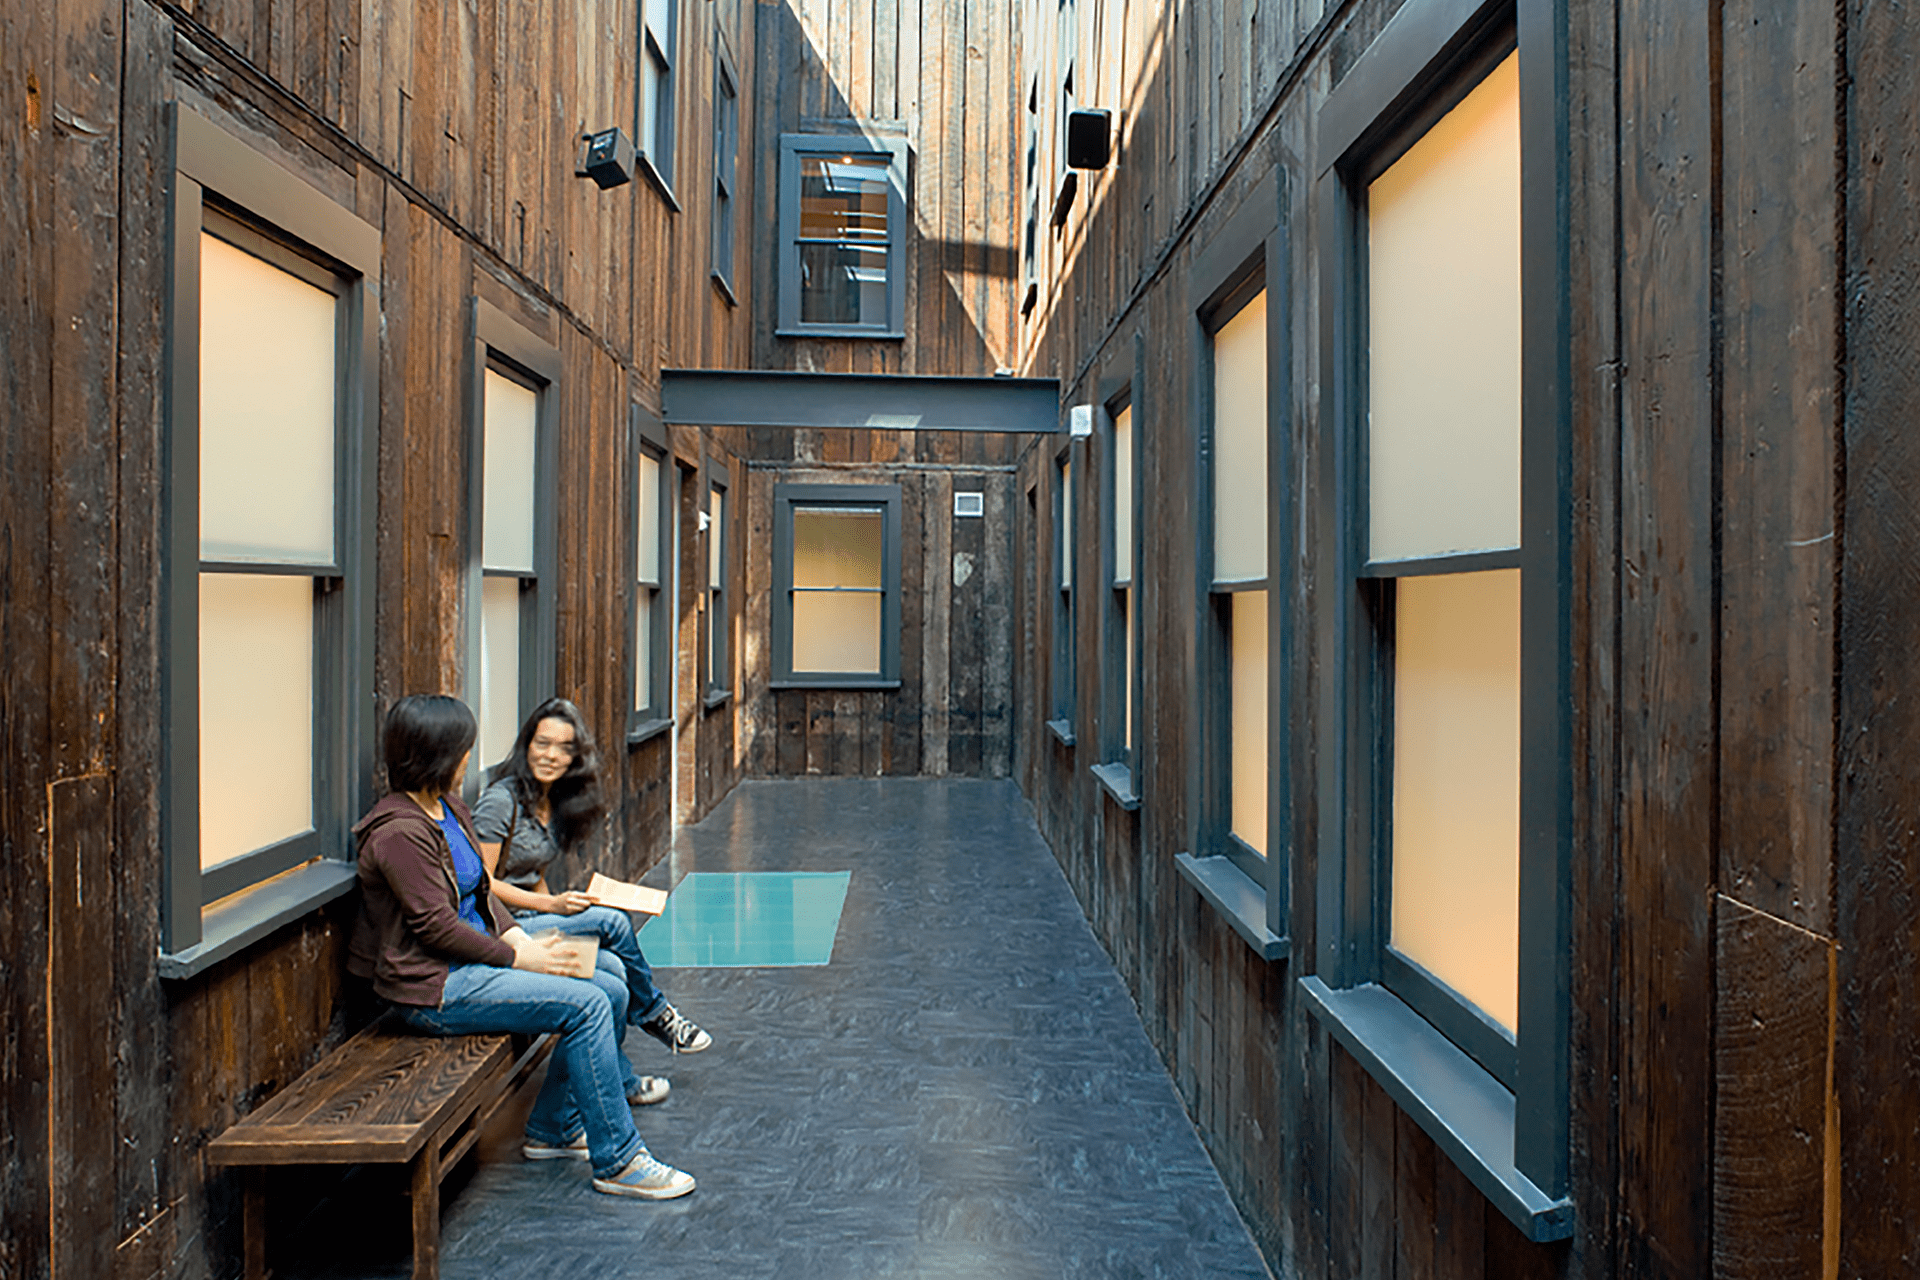 An interior courtyard at the Wing Luke Museum features dark wood siding, black-trimmed windows, and a place to sit.